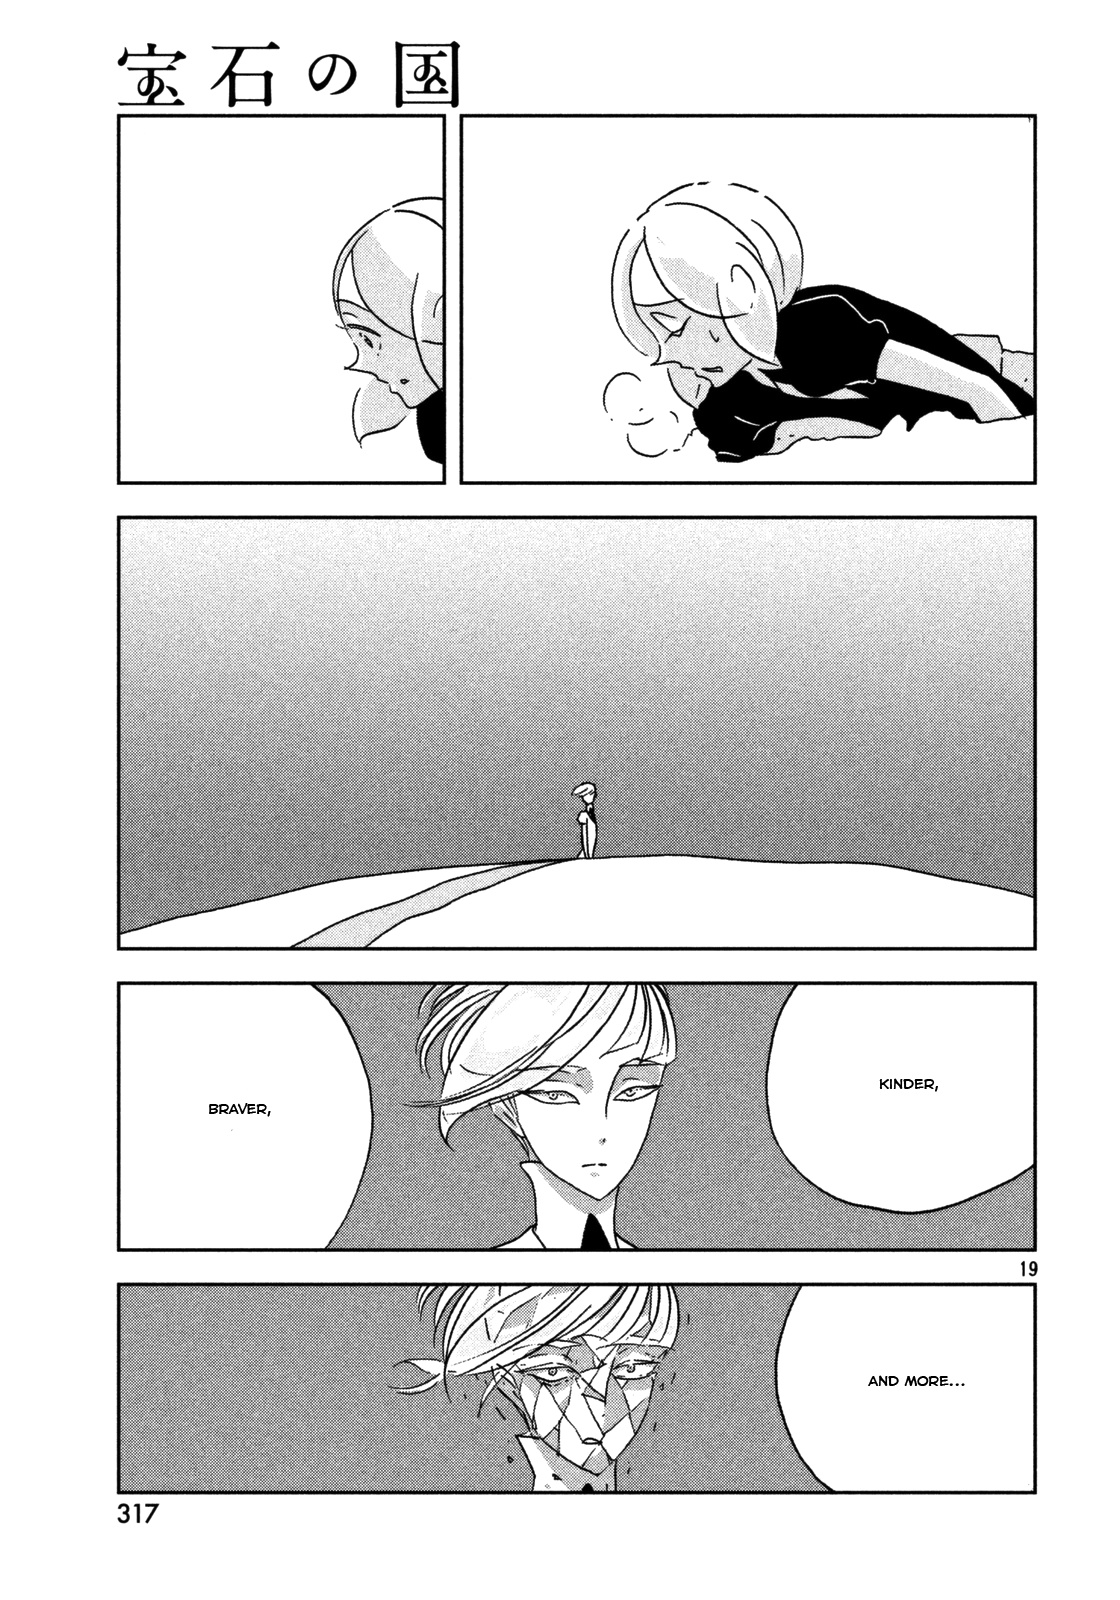 Land of the Lustrous, Chapter 22 image 19